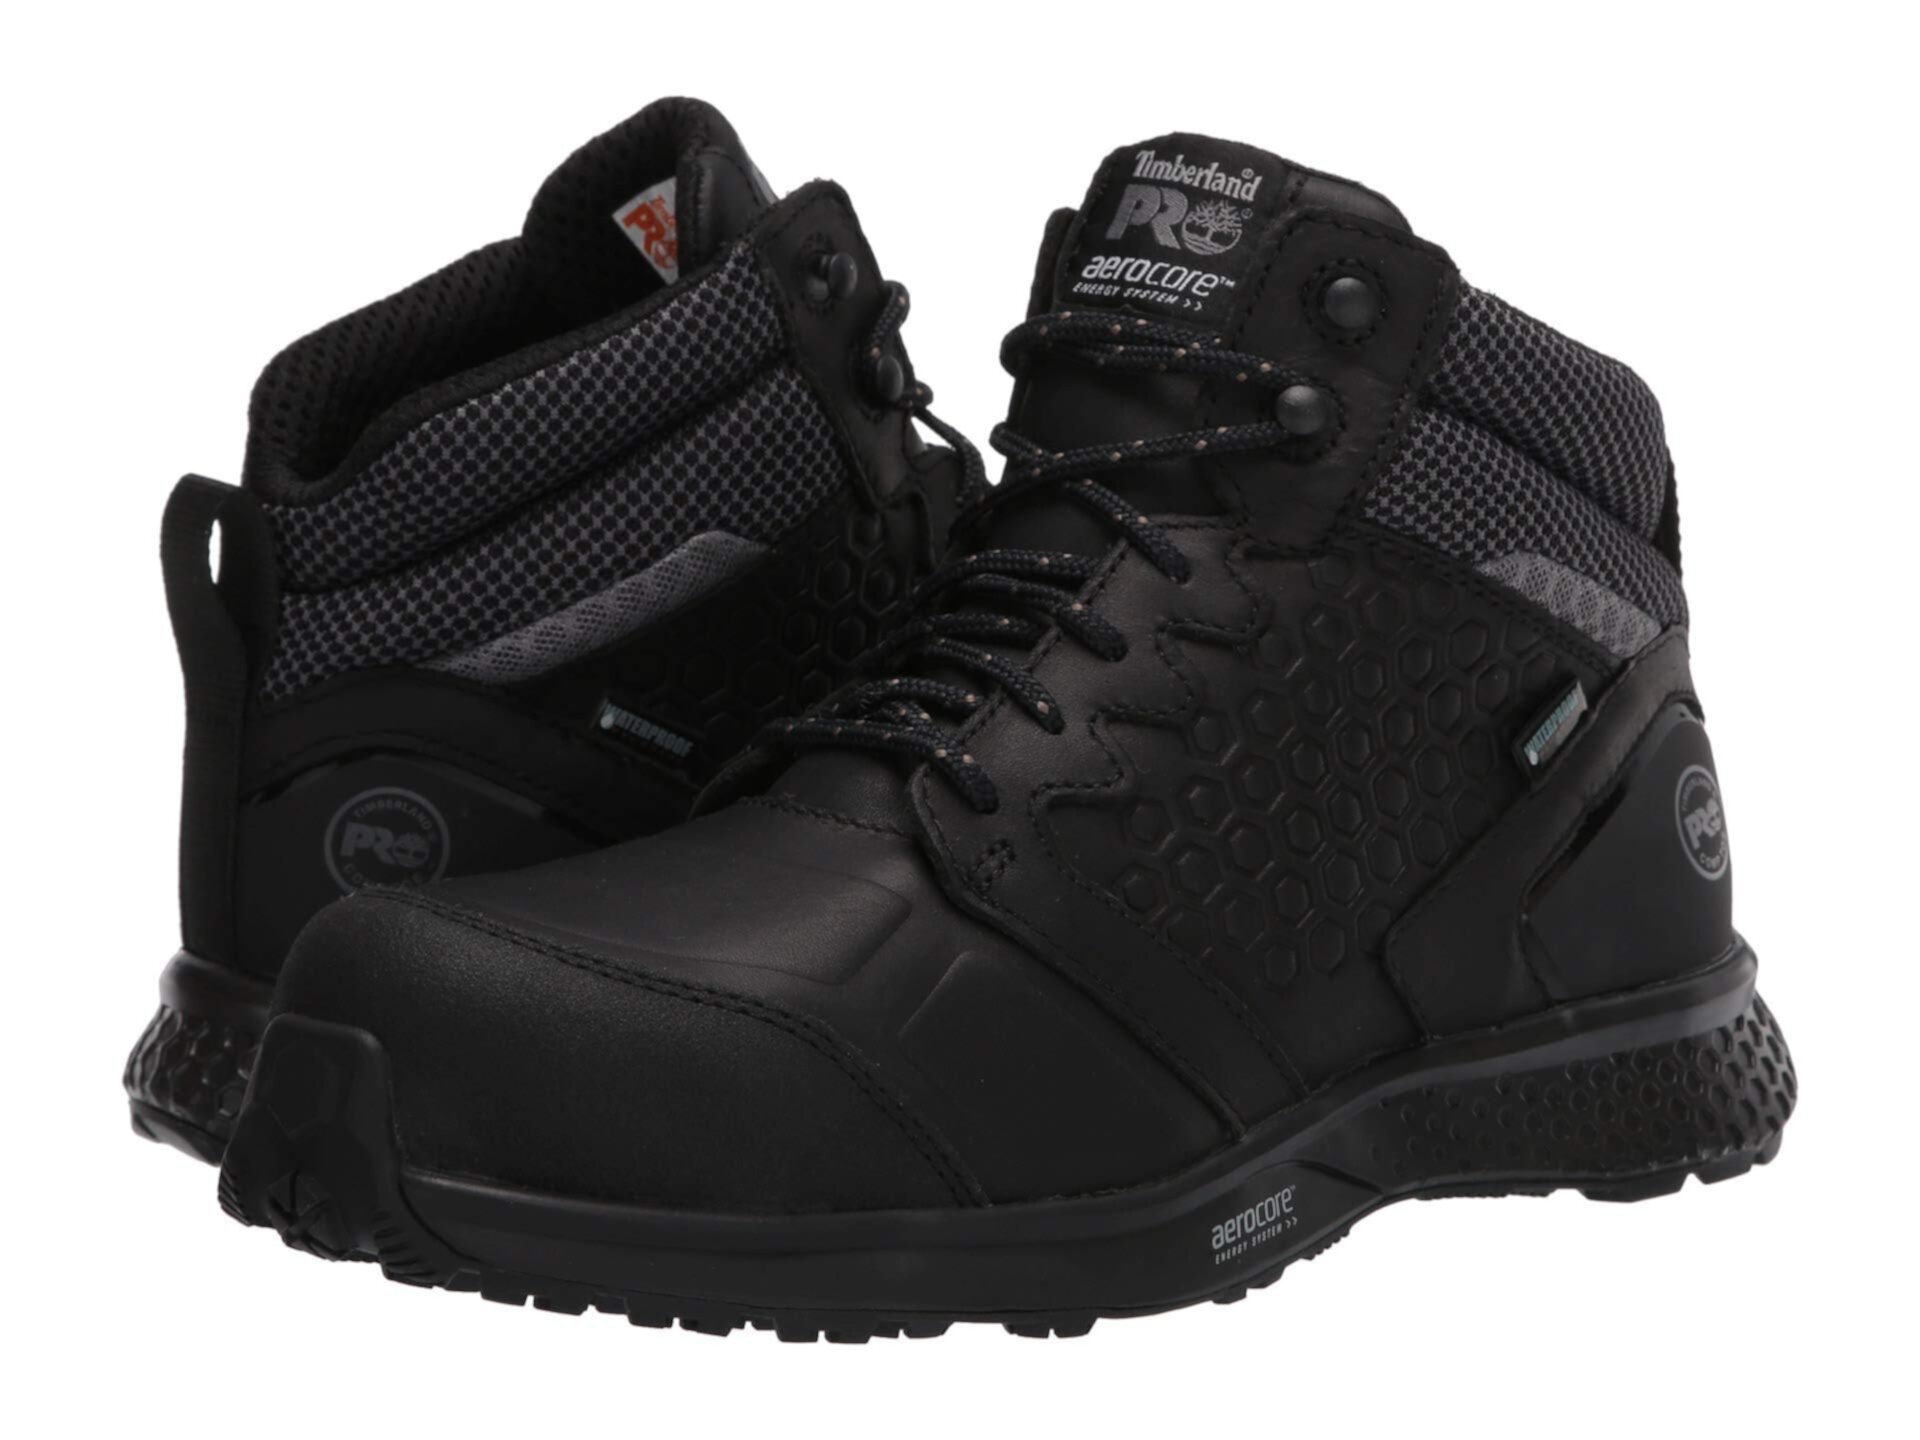 Reaxion Mid Composite Safety Toe Водонепроницаемый Timberland